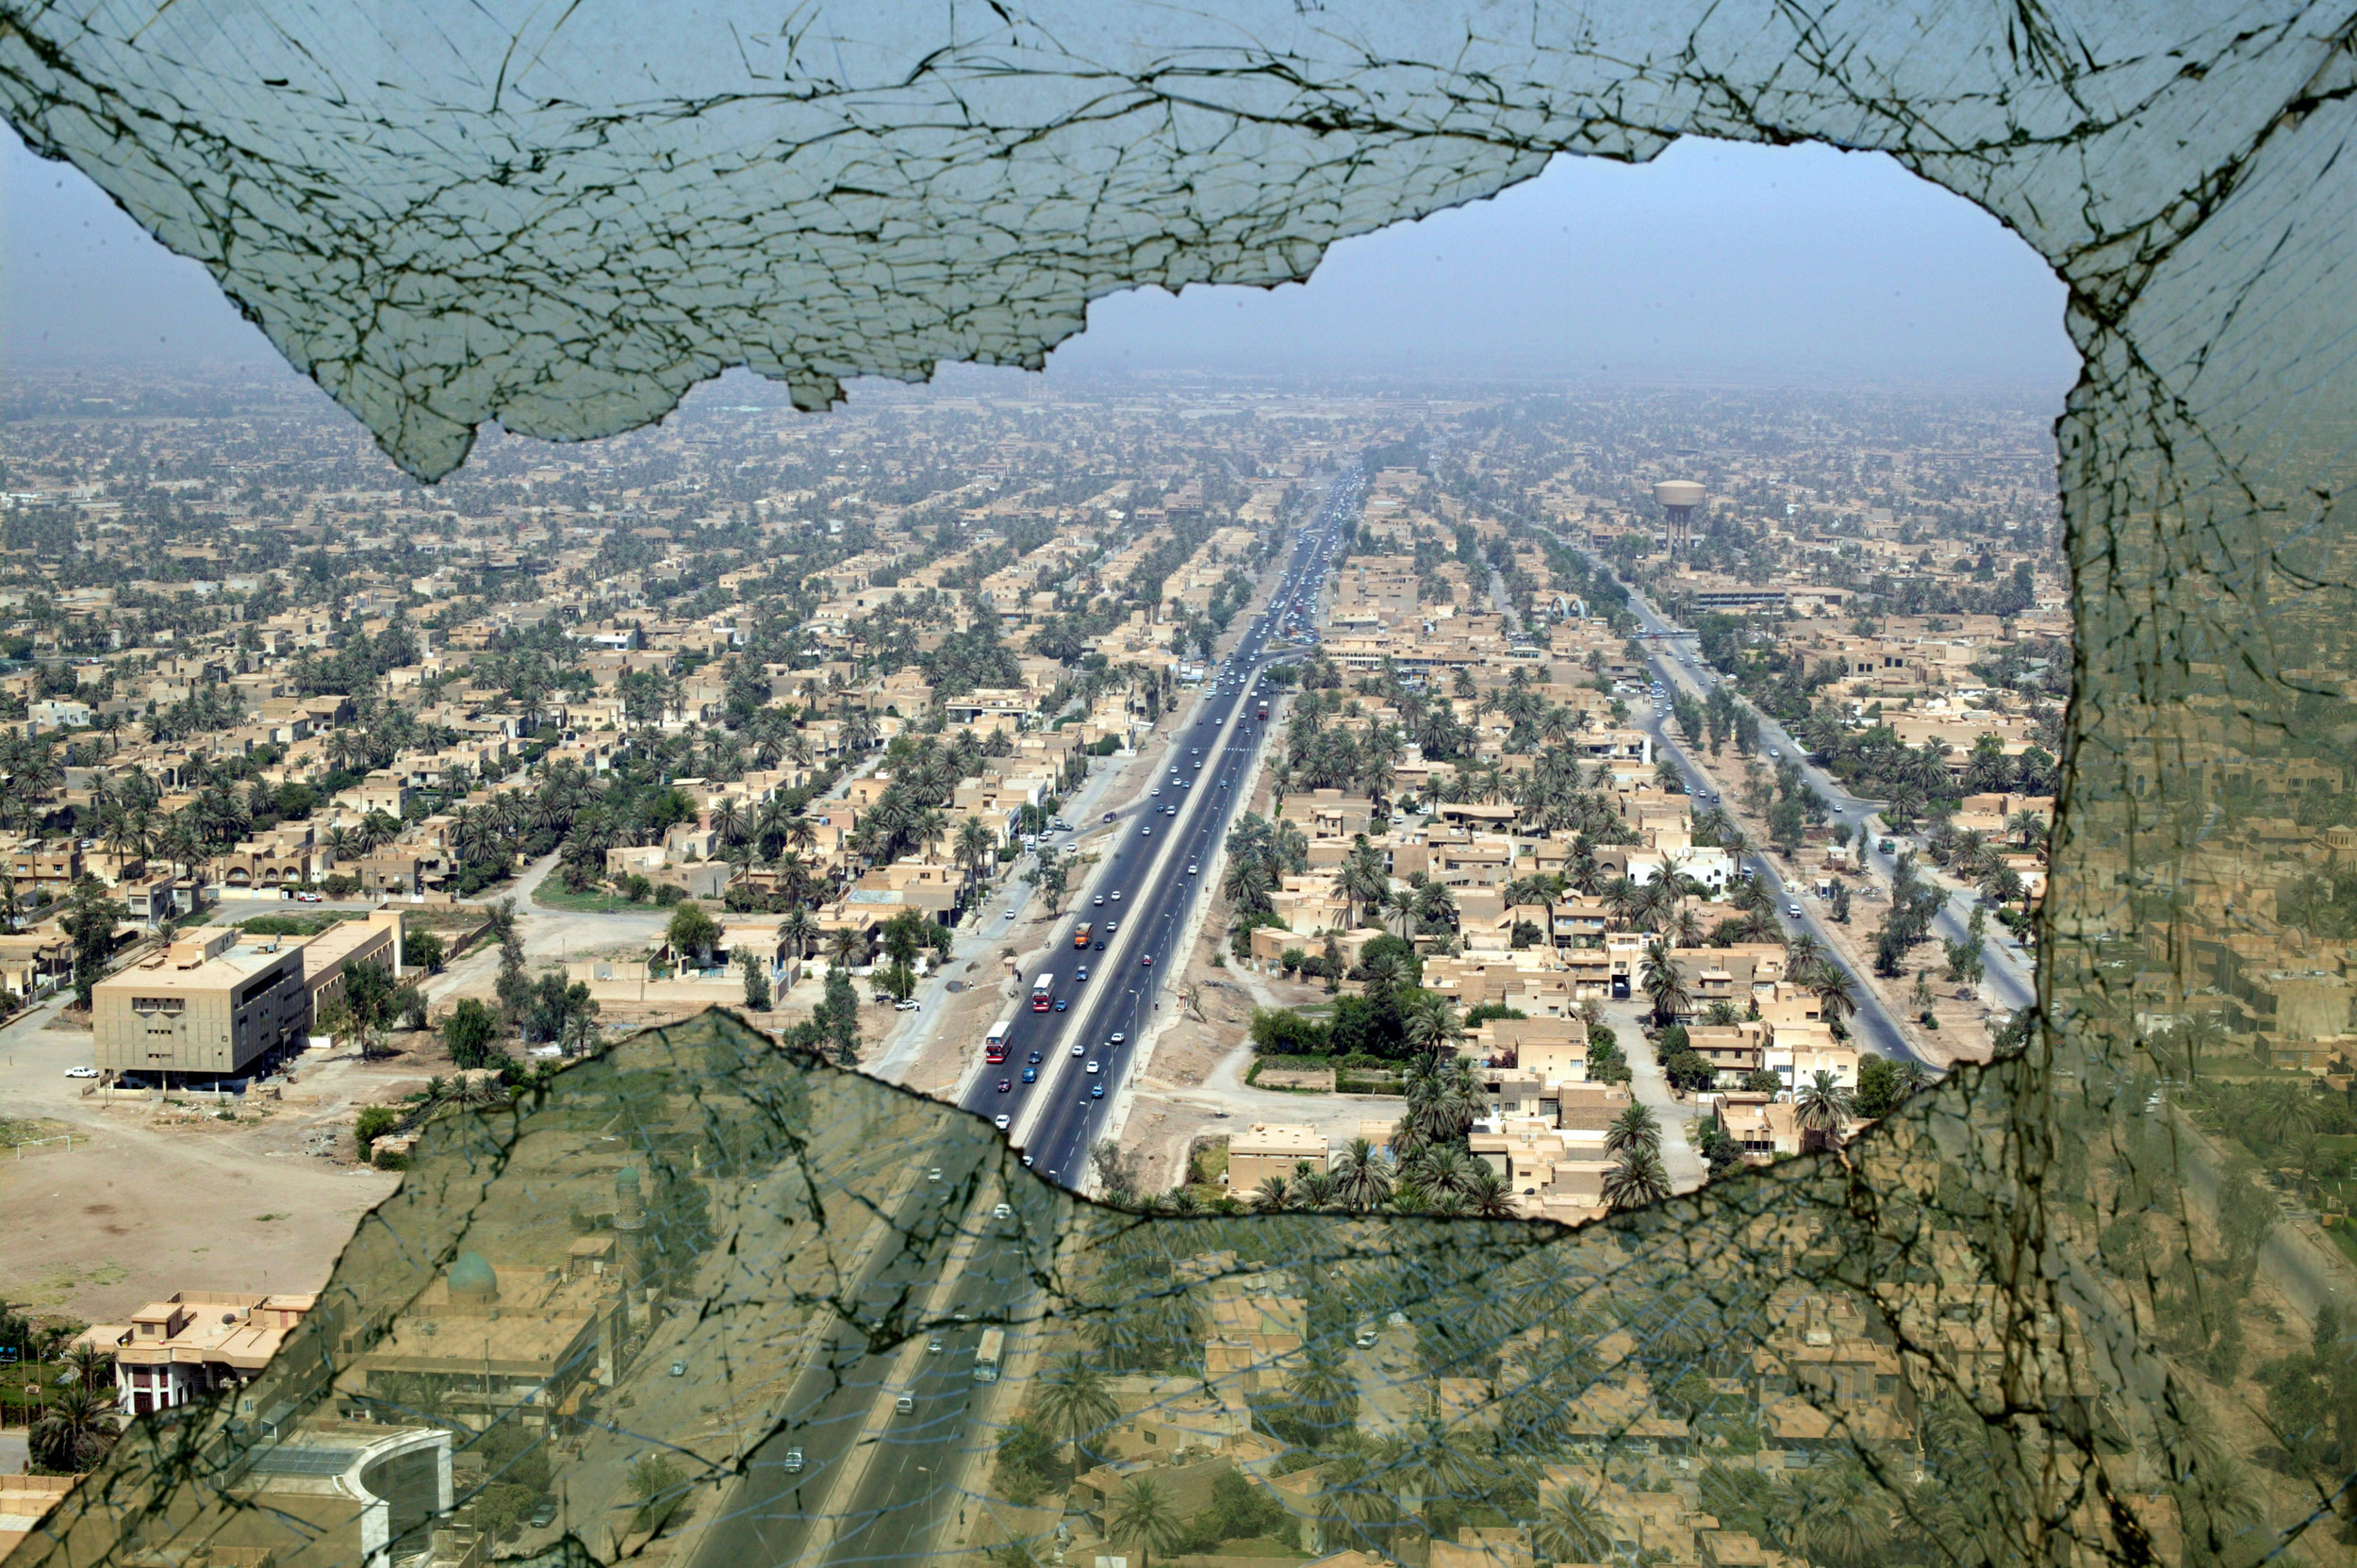  The city of Baghdad seen through the shattered window of the Tourism Tower that was bombed and looted during the war. 